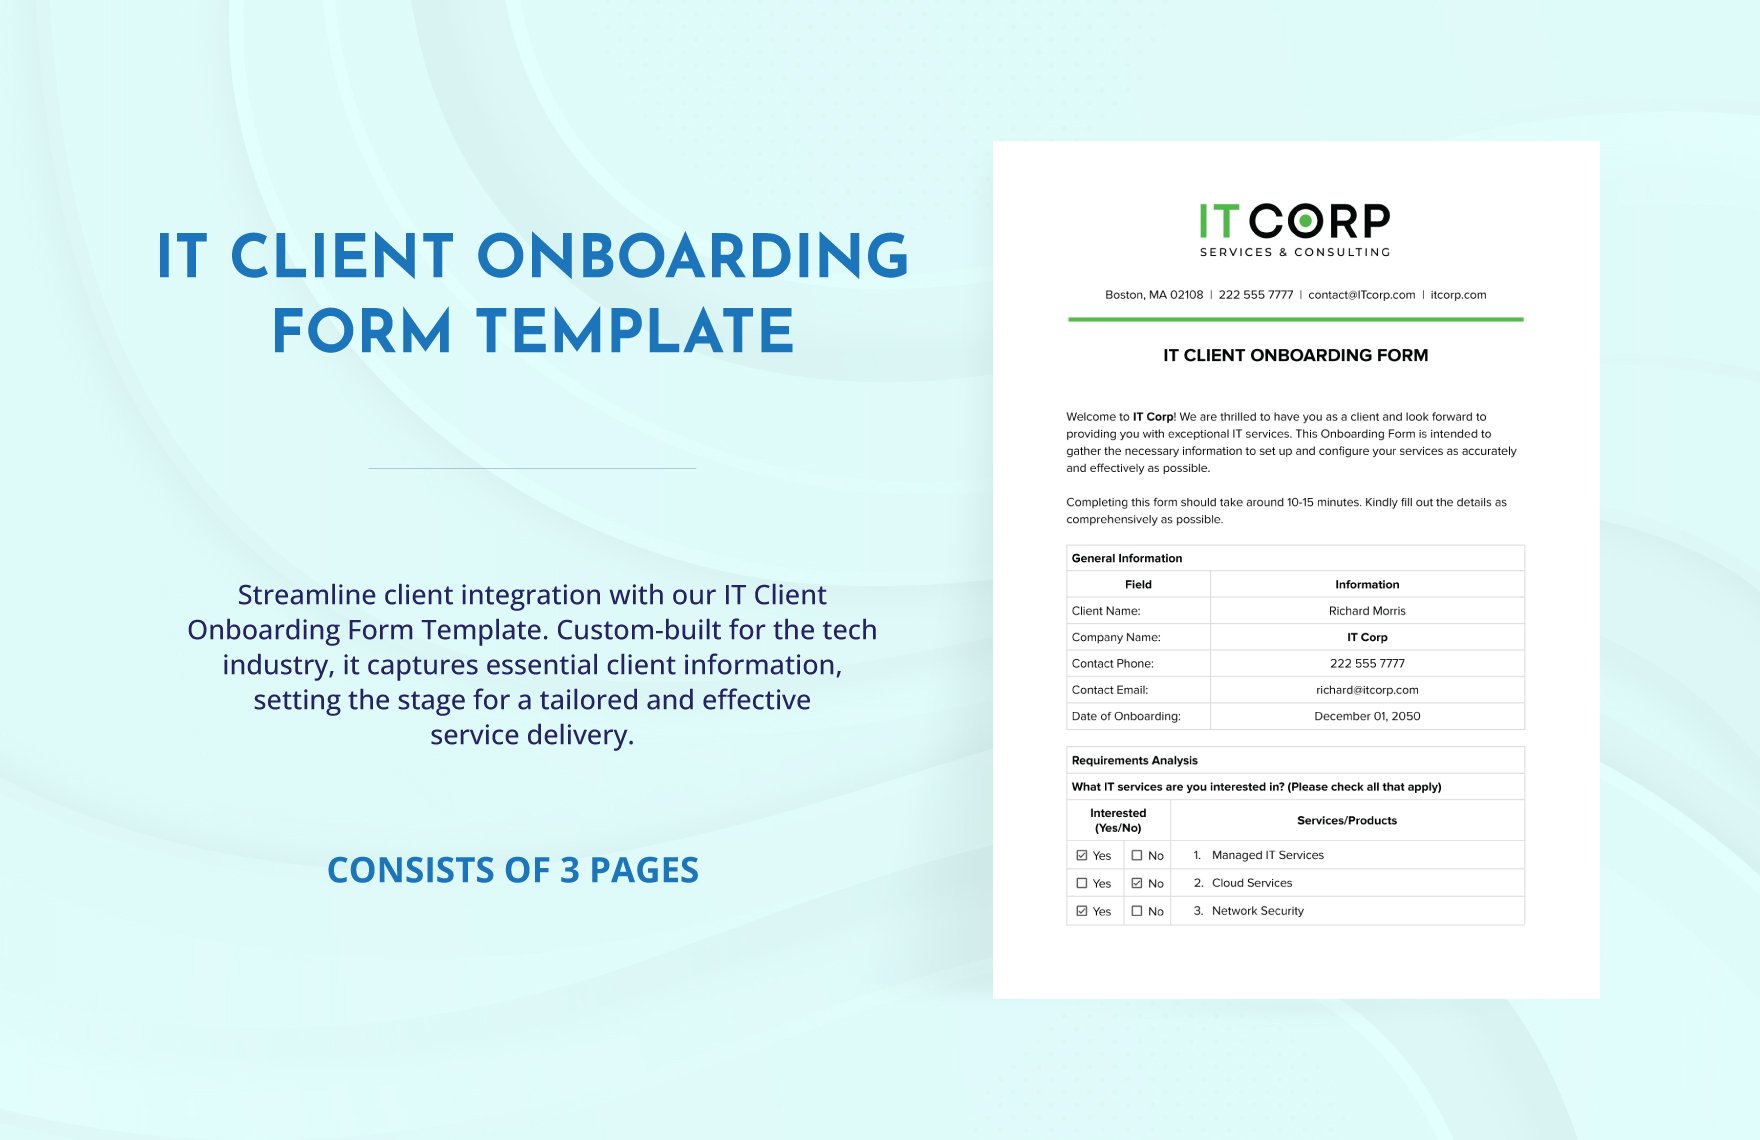 IT Client Onboarding Form Template